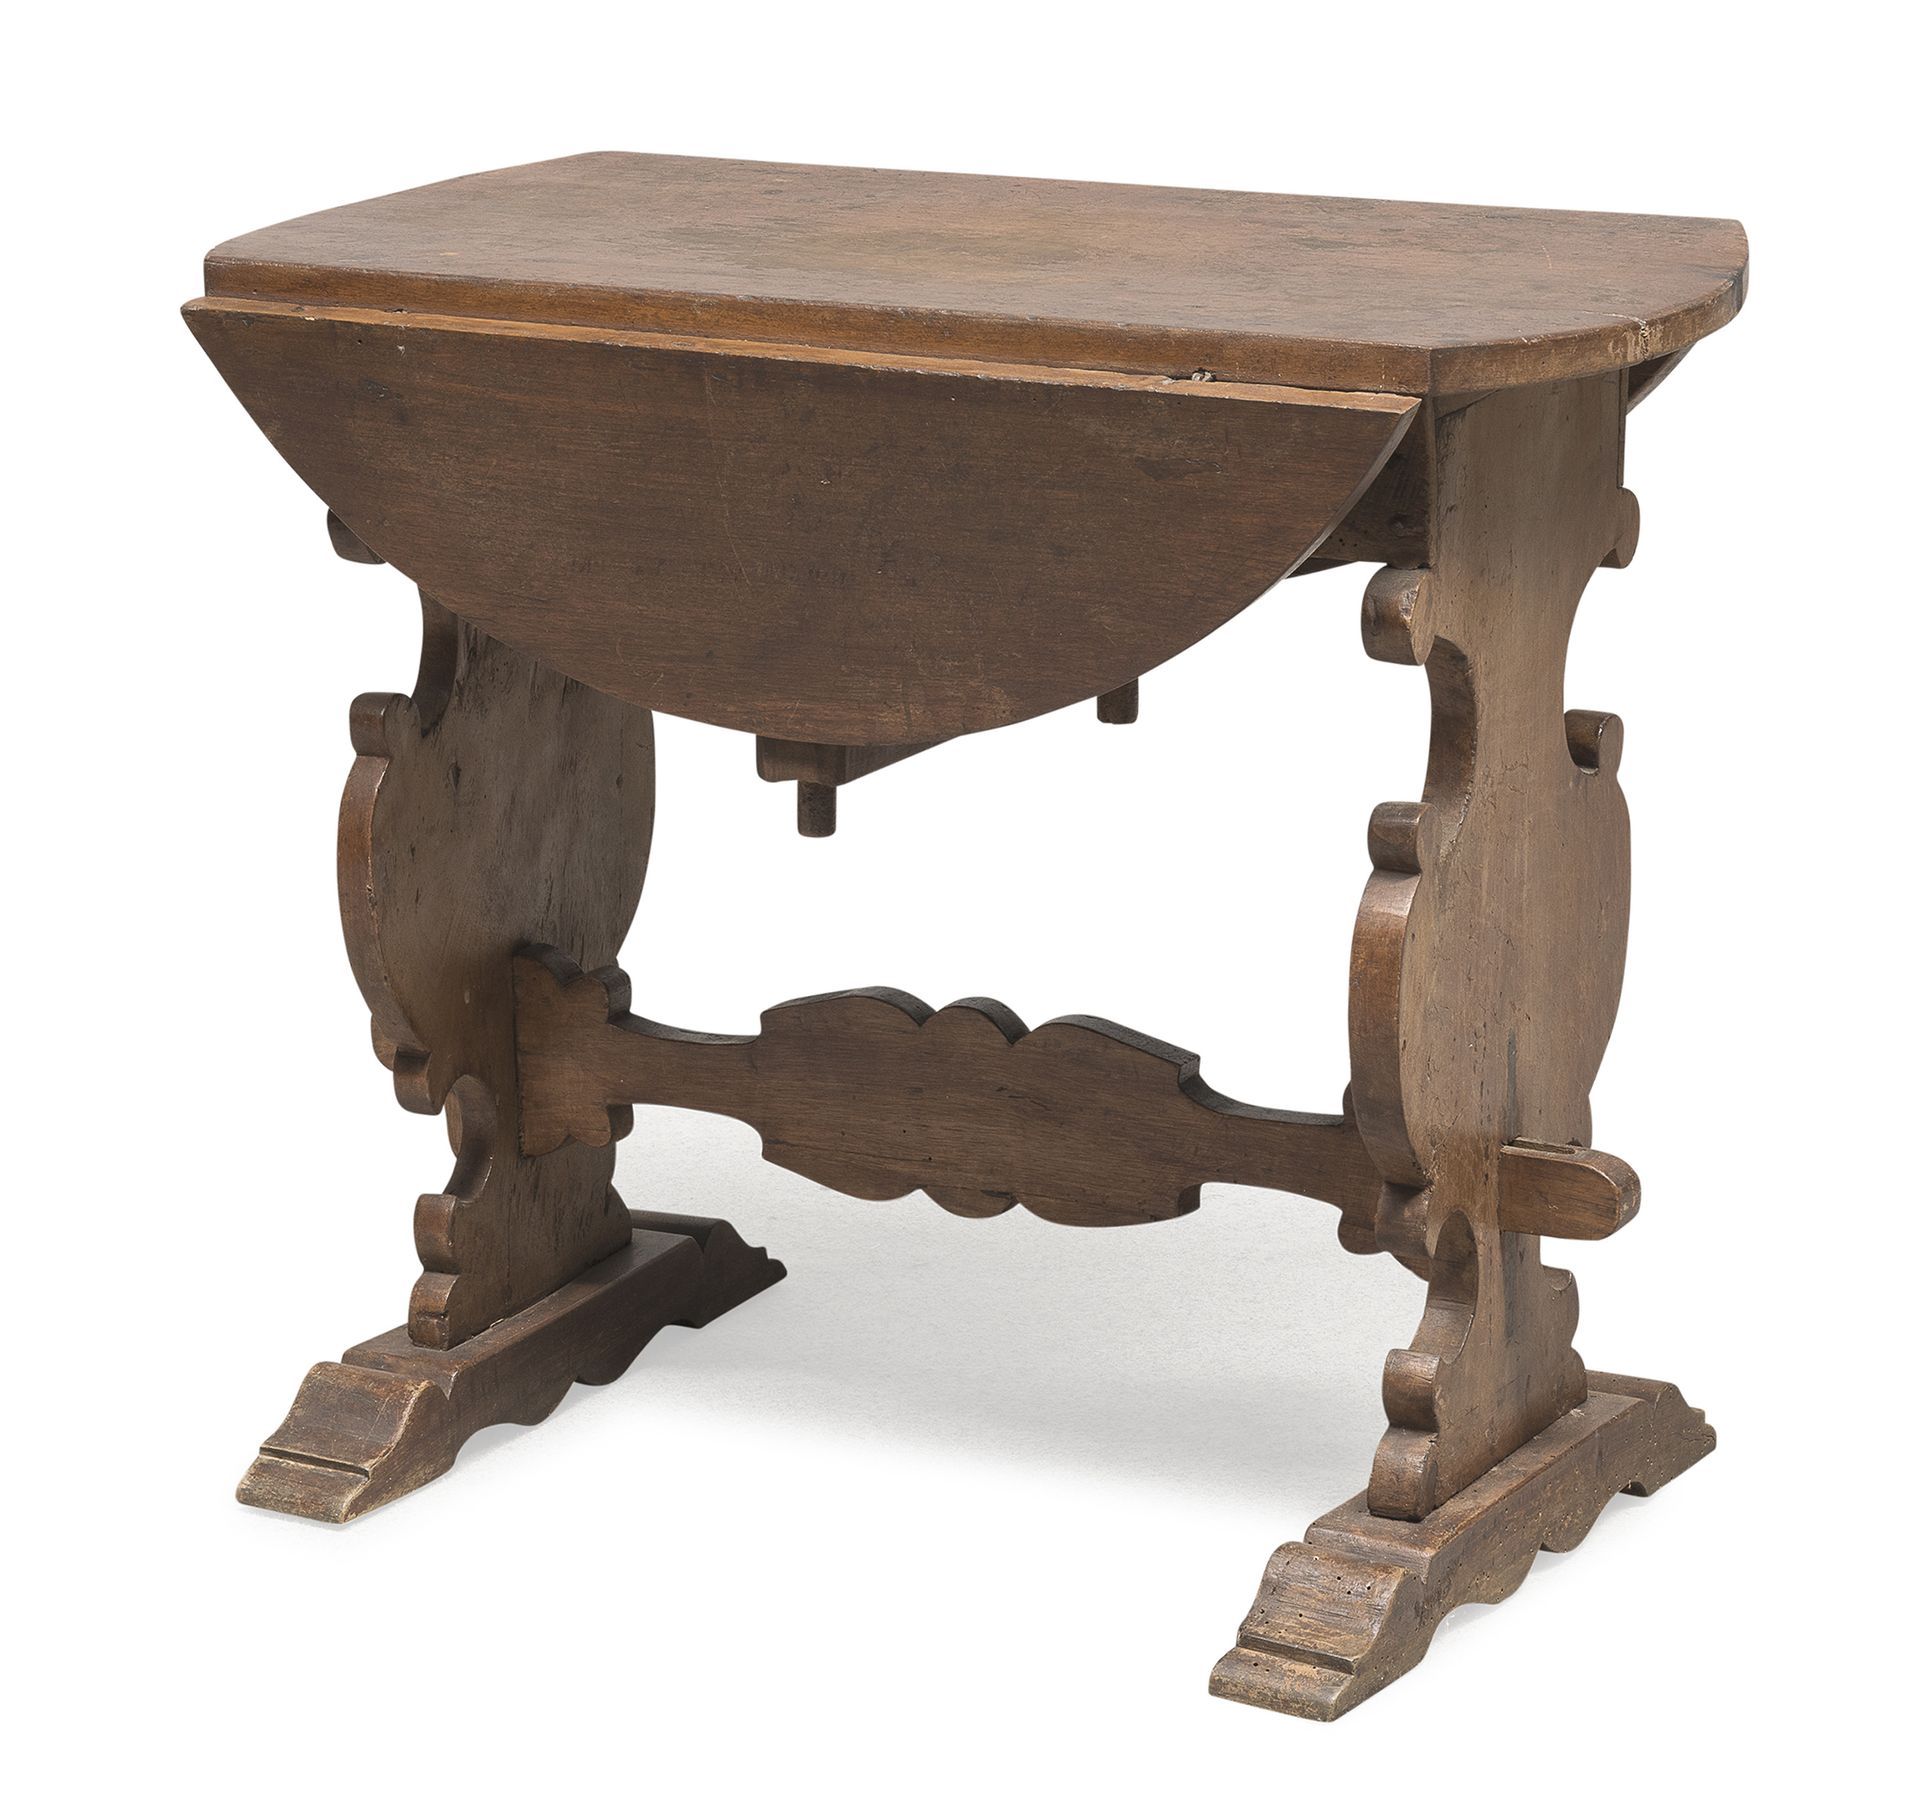 Null 17TH-CENTURY STYLE DROP-LEAF TABLE